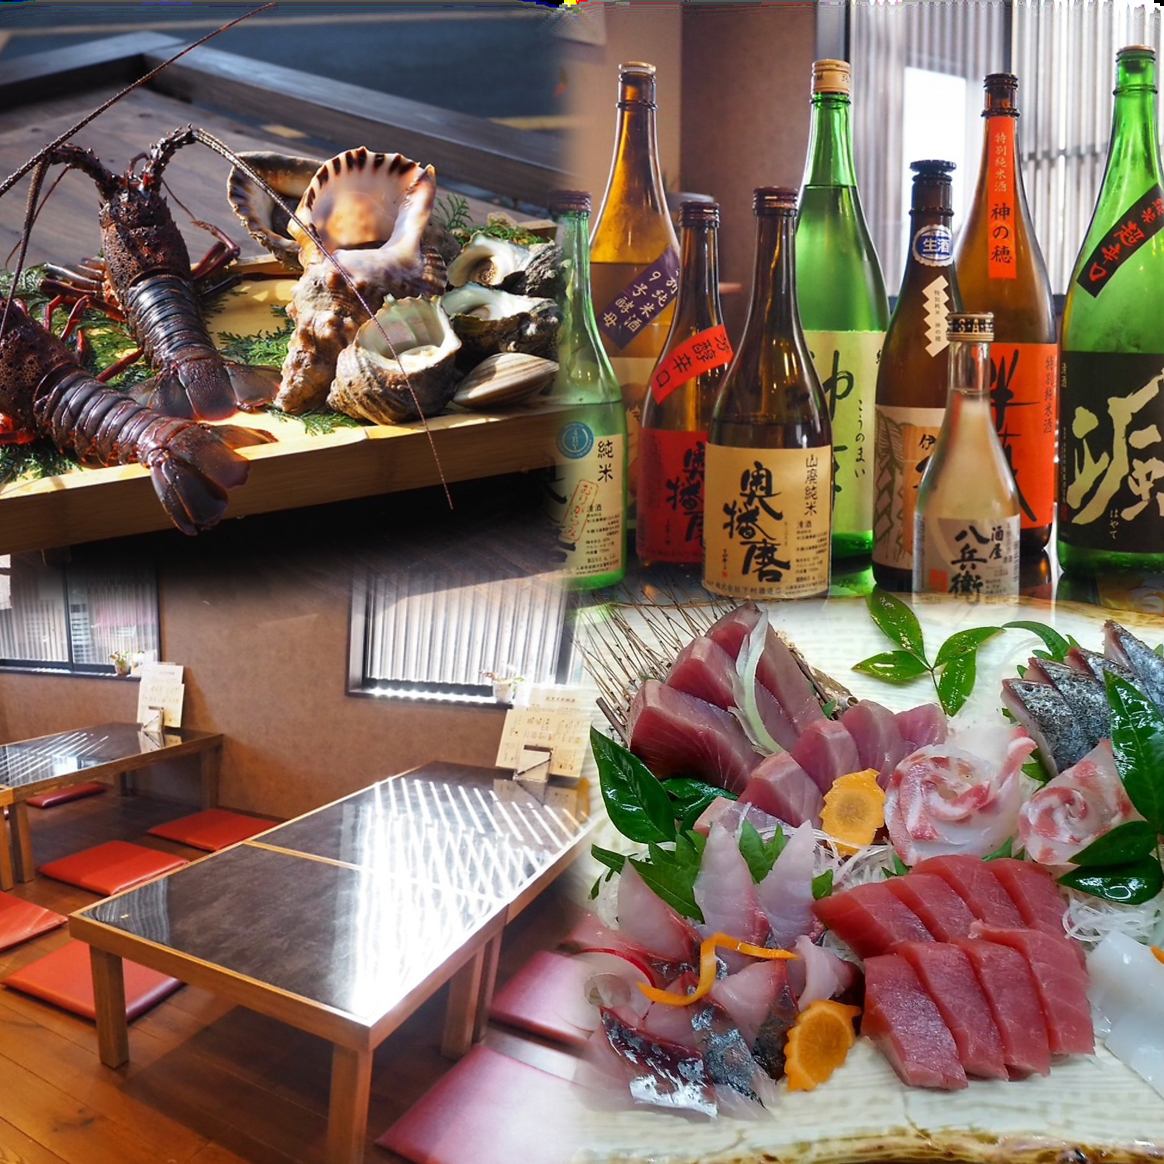 We purchase ingredients from Mie Prefecture ♪ Please come and visit us while sightseeing!